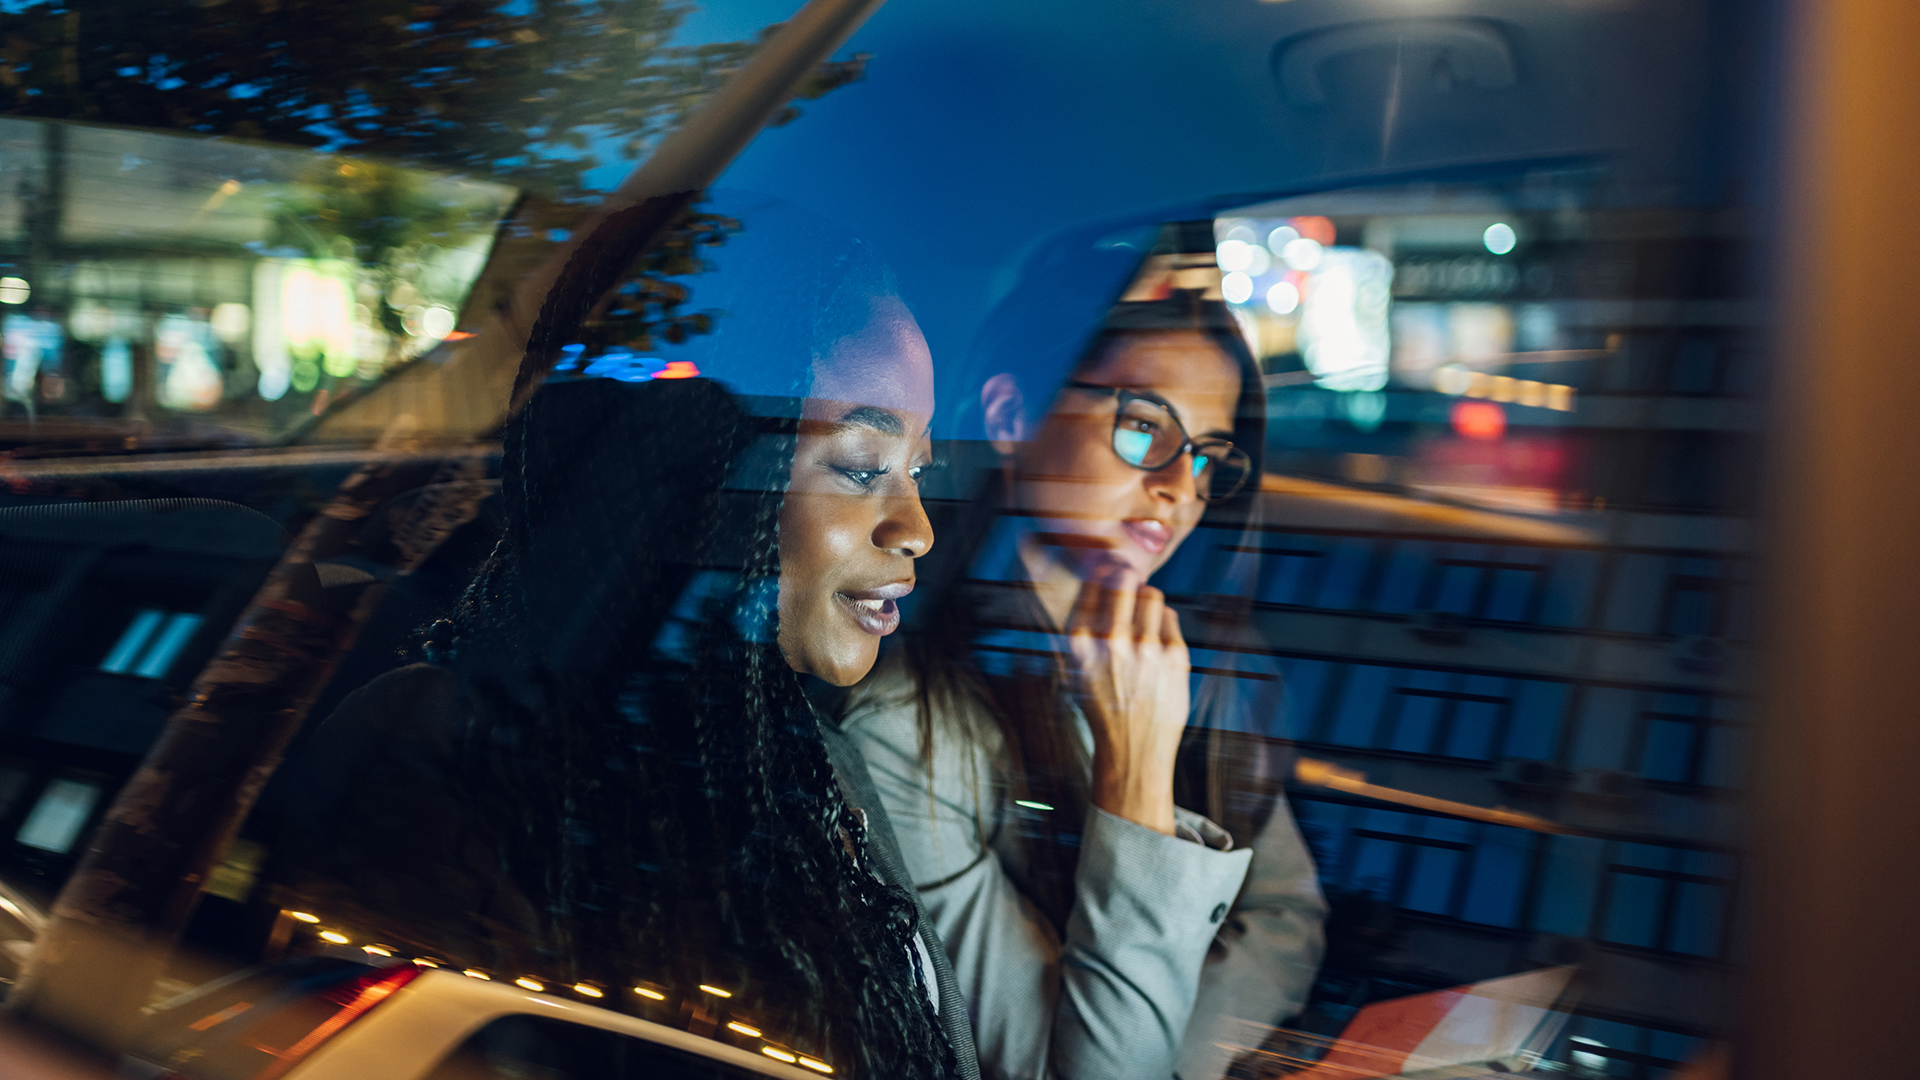 Two women are sitting in the back of a car looking at the screen of a digital device. The women on the left appears to be talking and the woman on the right has her hand on her chin.